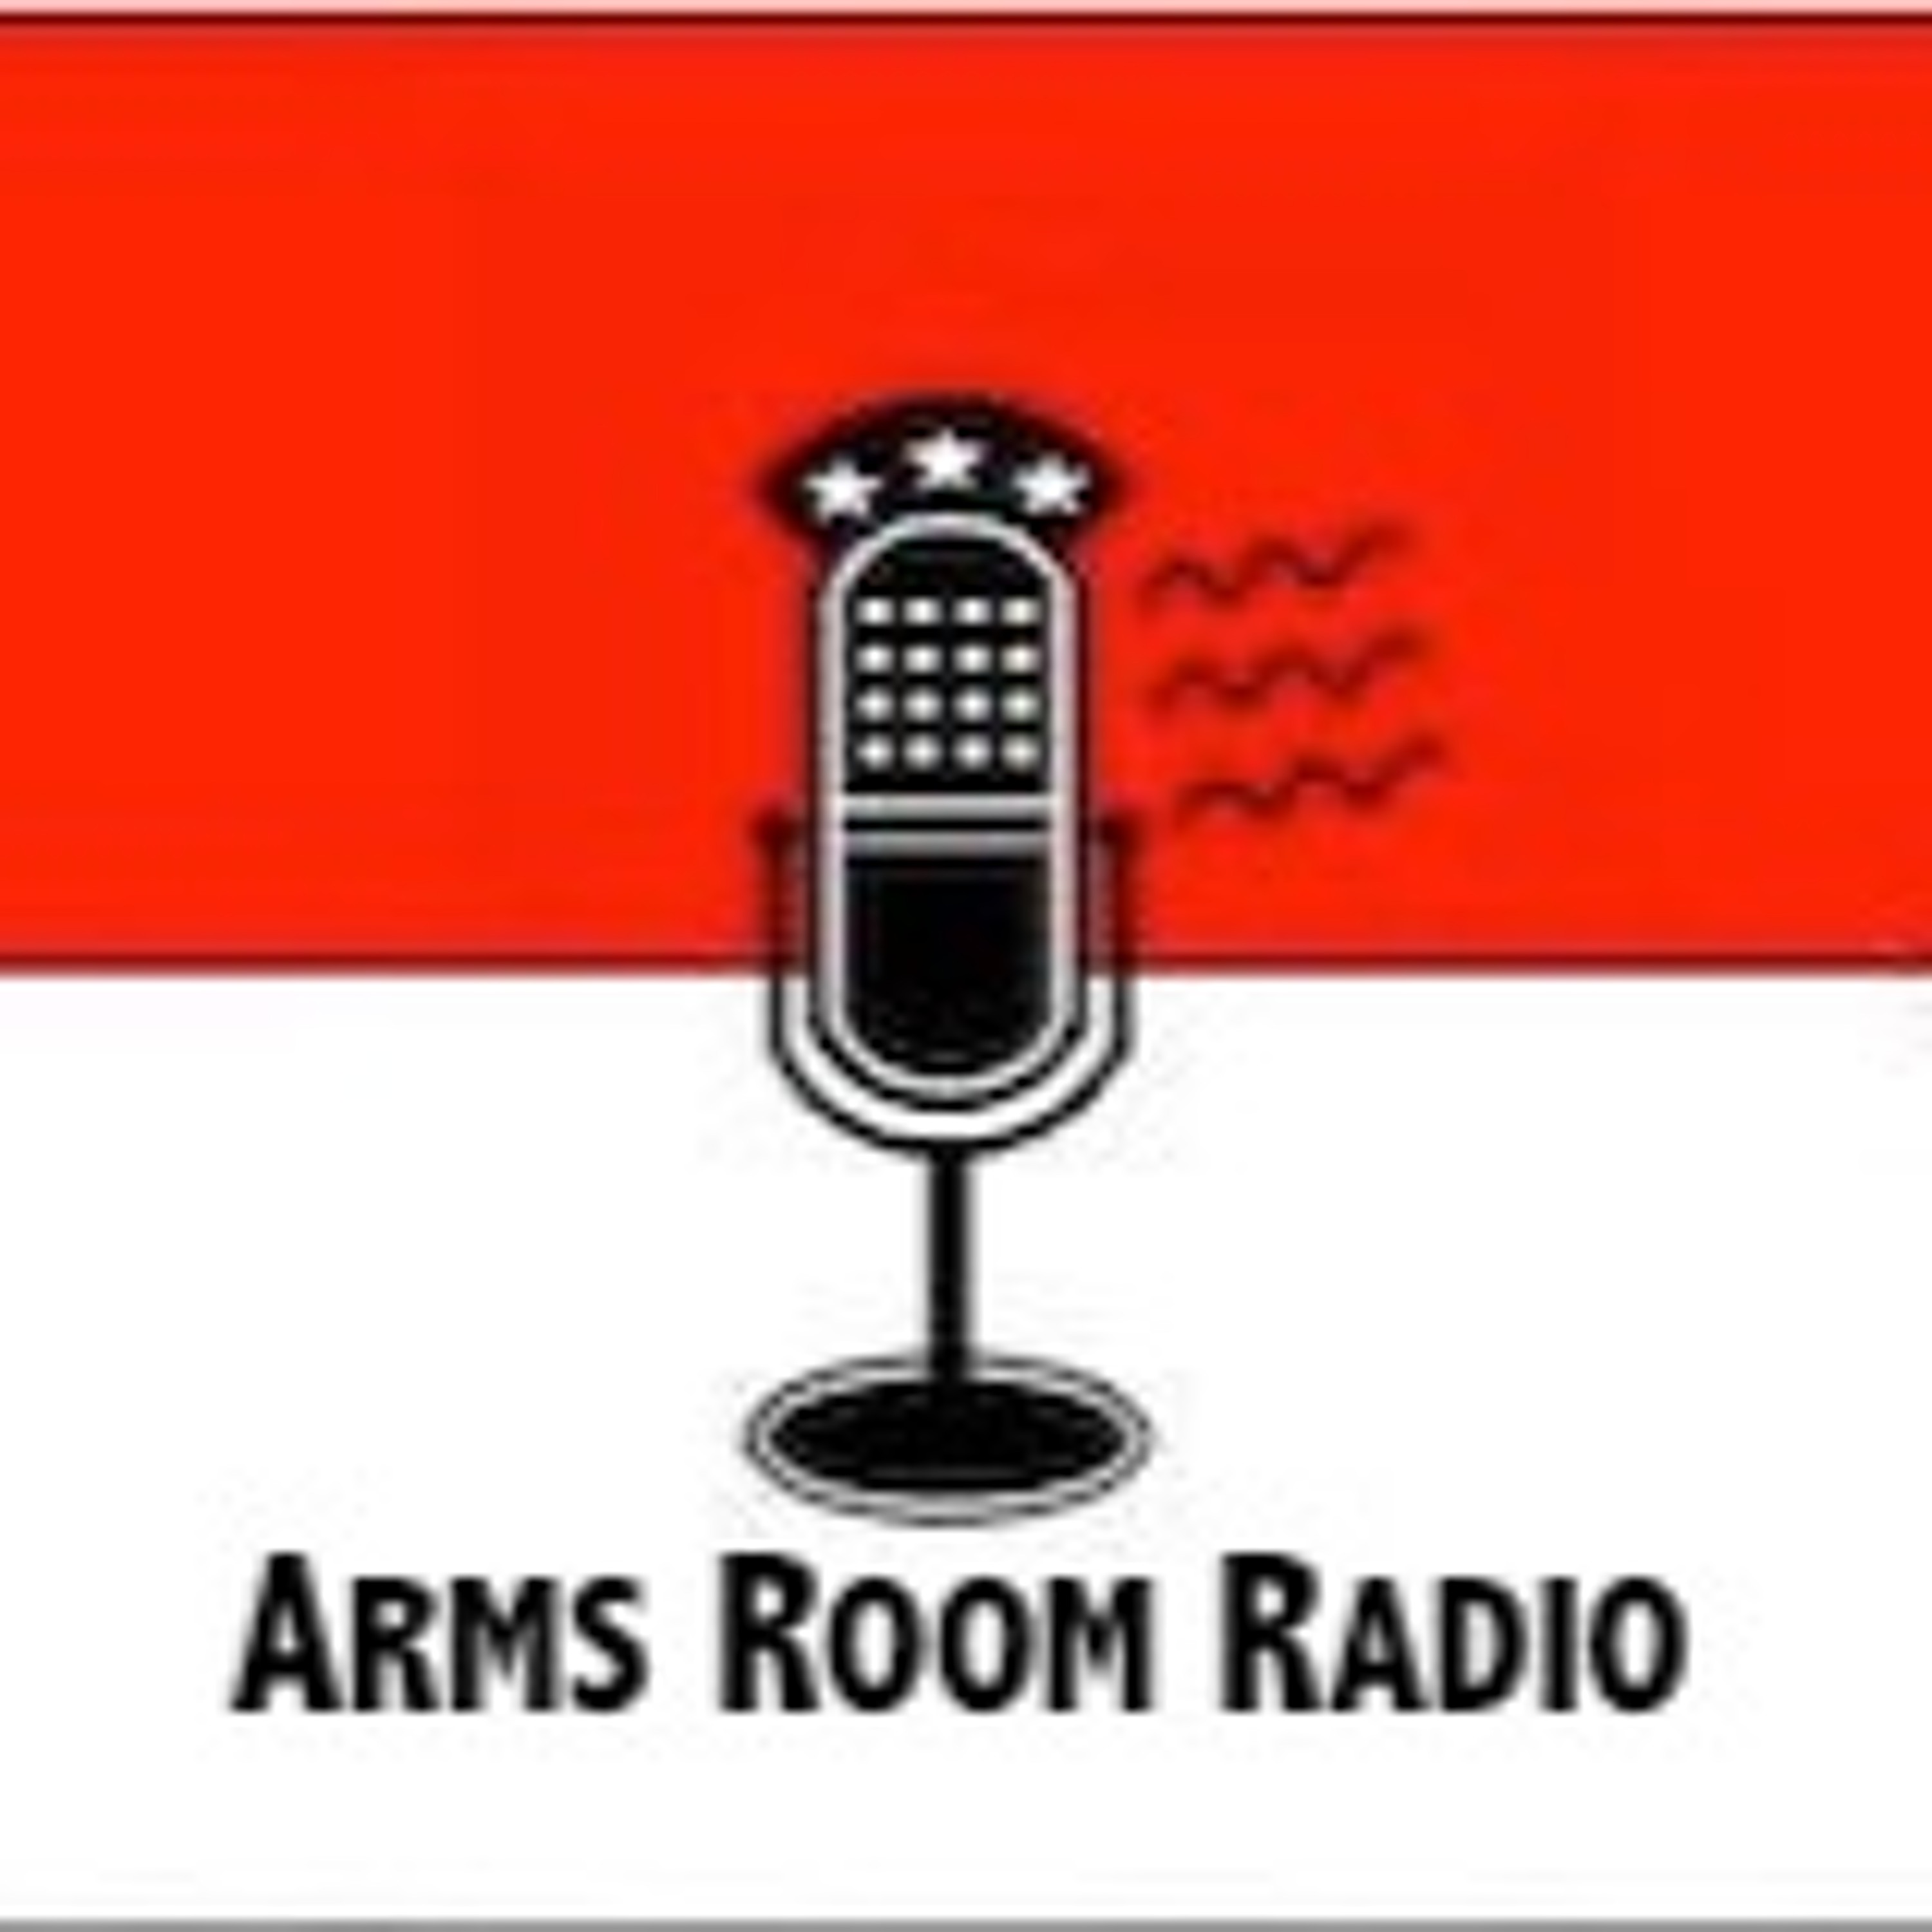 ArmsRoomRadio 01.30.21 Mr. Todd Fossey and proposed state gun laws